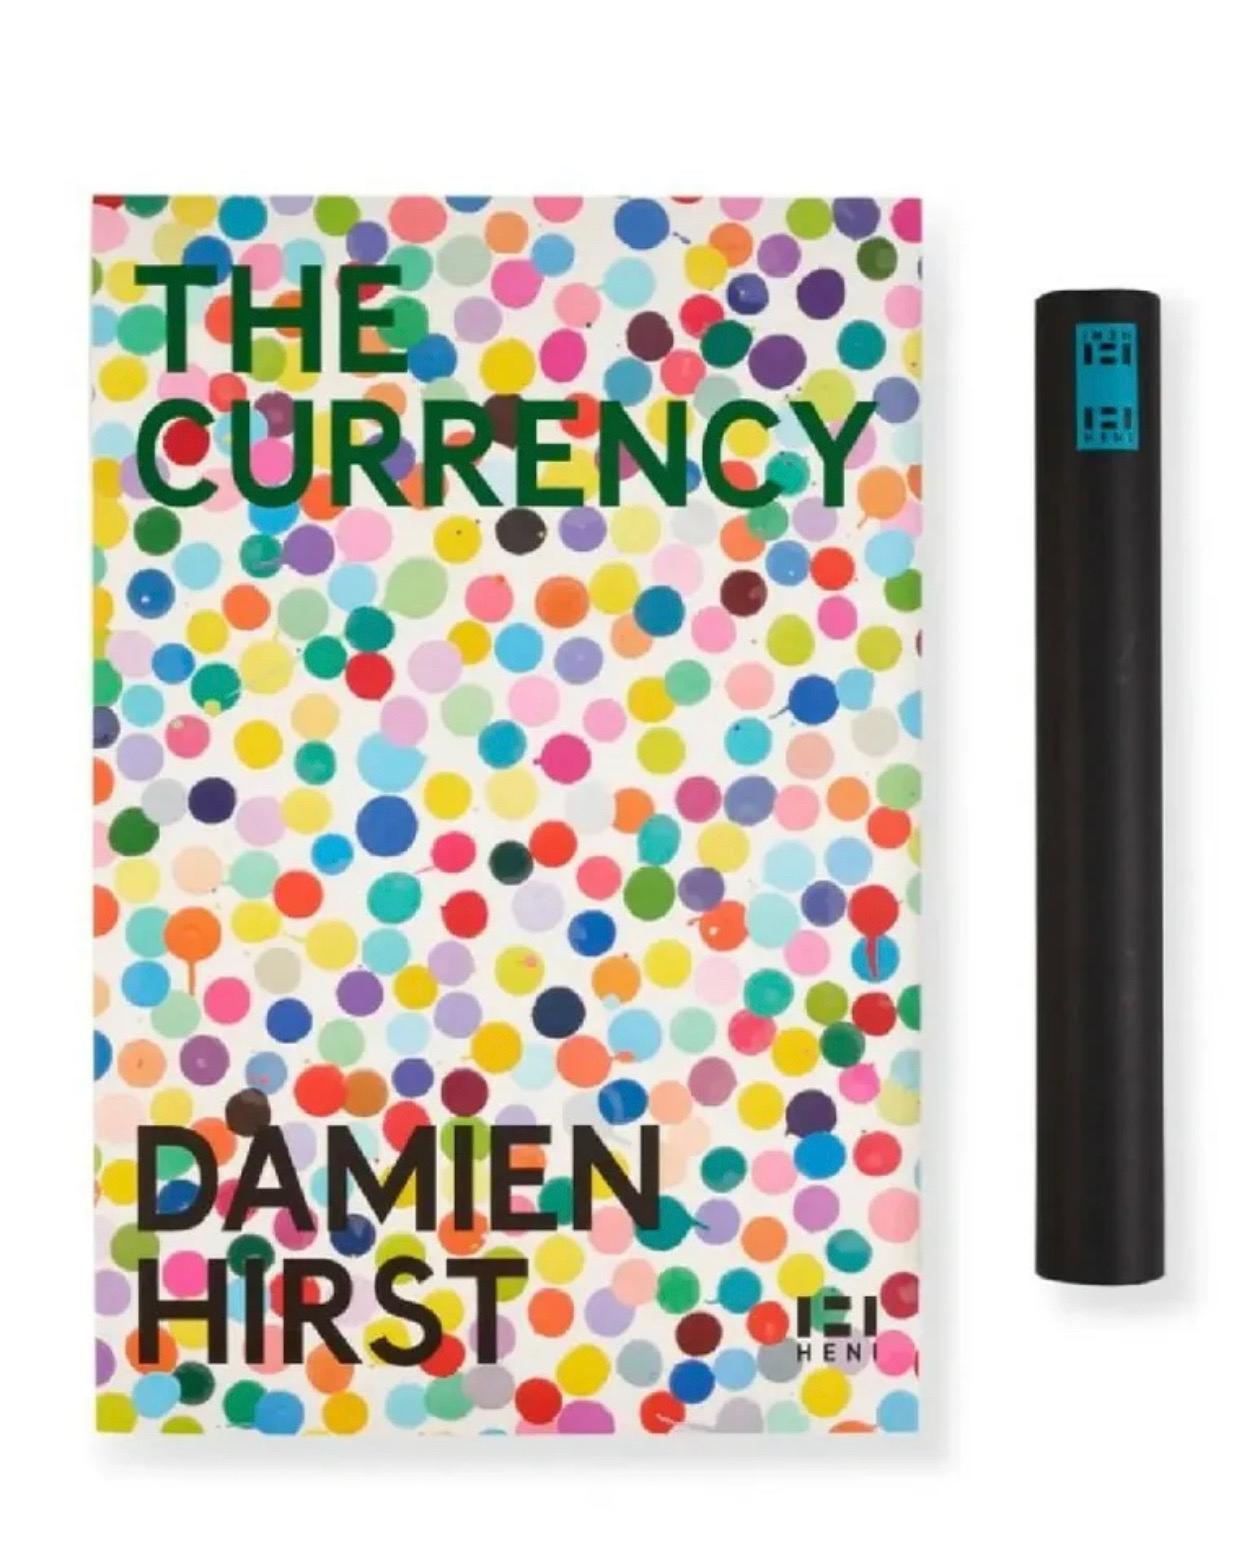 Damien Hirst
The Currency (Blue),2022

Offset lithograph on thick semi-gloss poster paper of Damien Hirst's Currency project currently on display at Newport Street Gallery.
35 × 23 2/5 in 88.9 × 59.4 cm